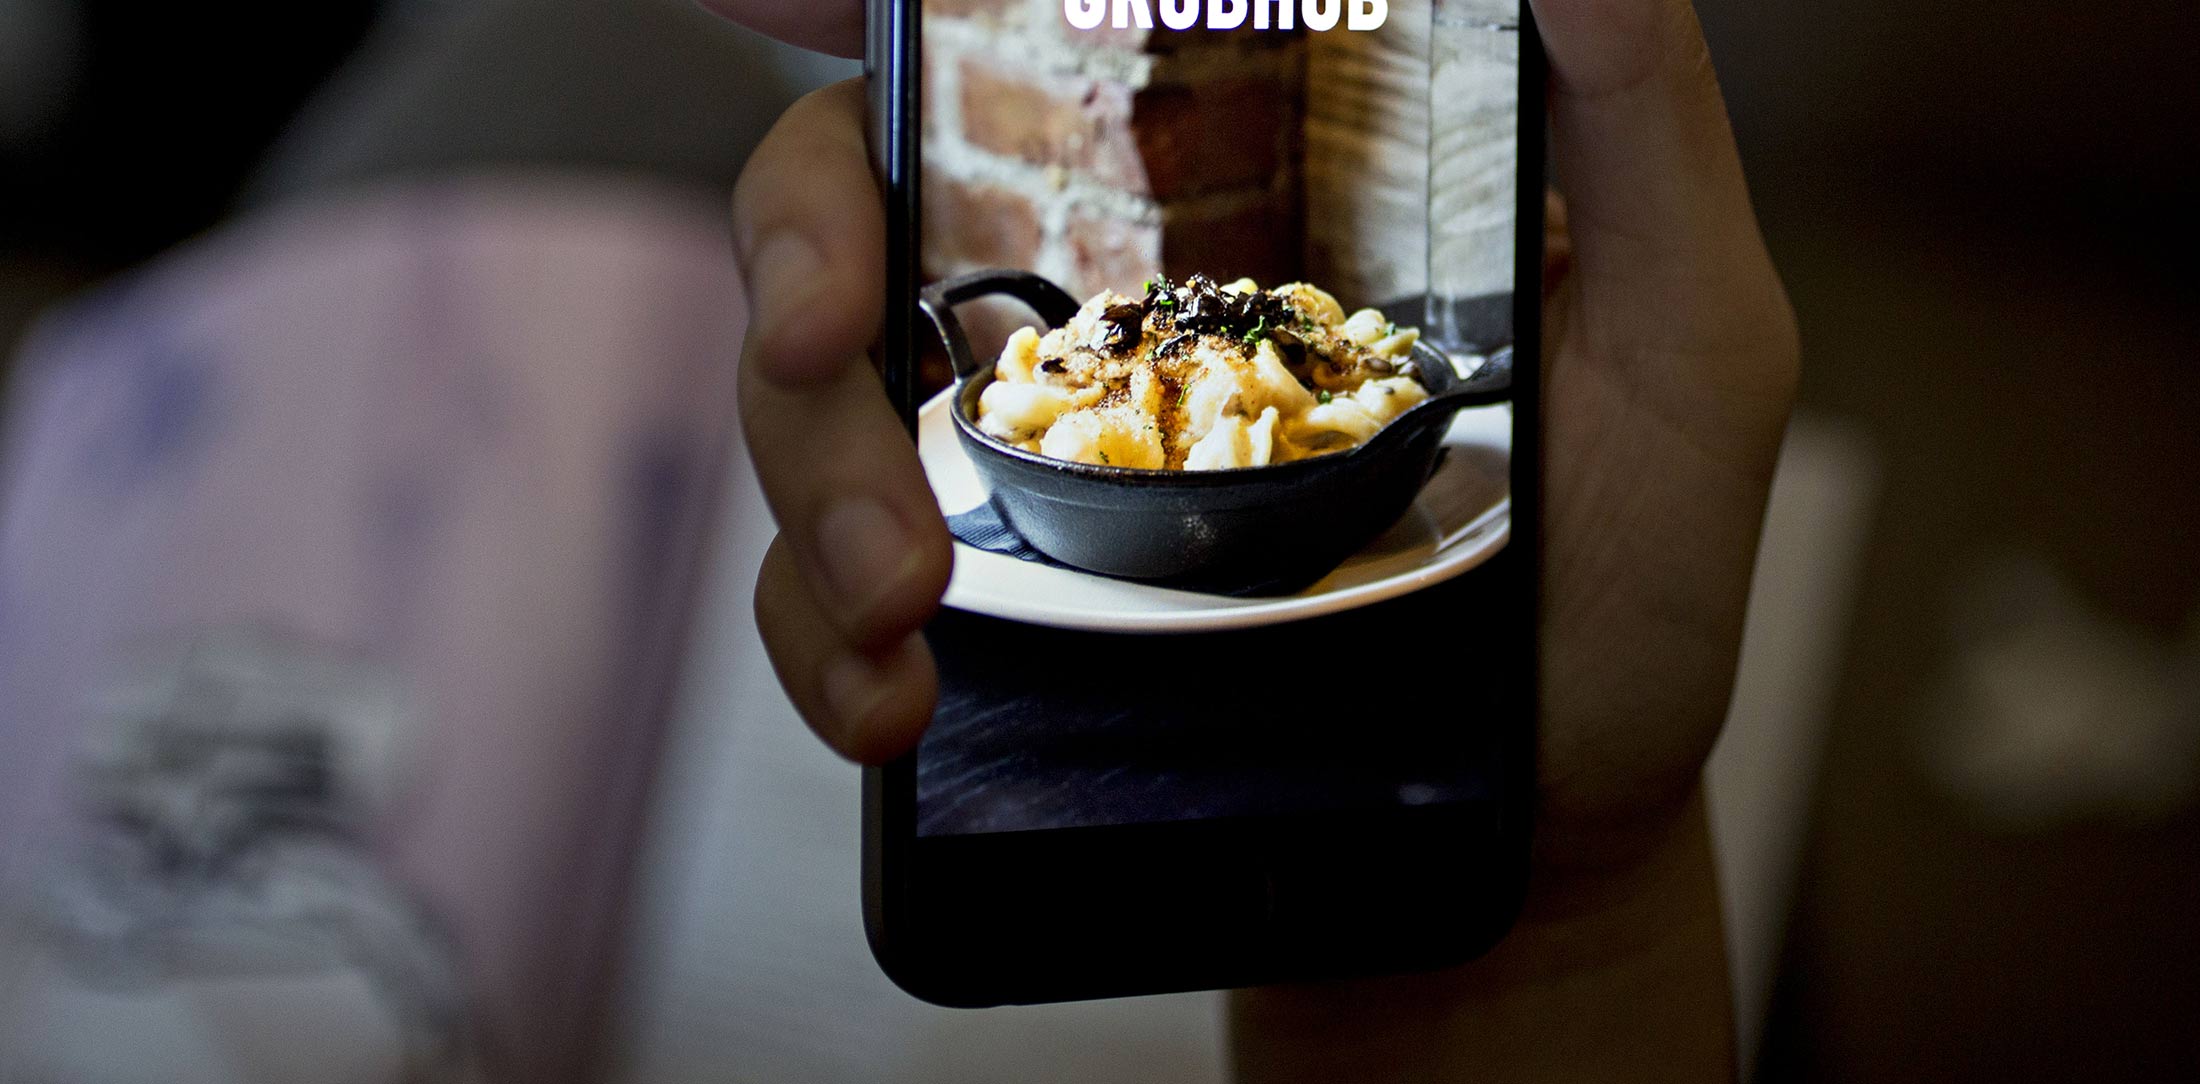 GrubHub Inc. application is demonstrated for a photograph on an Apple Inc. iPhone in Washington, D.C., U.S., on Saturday, Feb. 4, 2017. GrubHub is scheduled to release earnings figures on February 8.